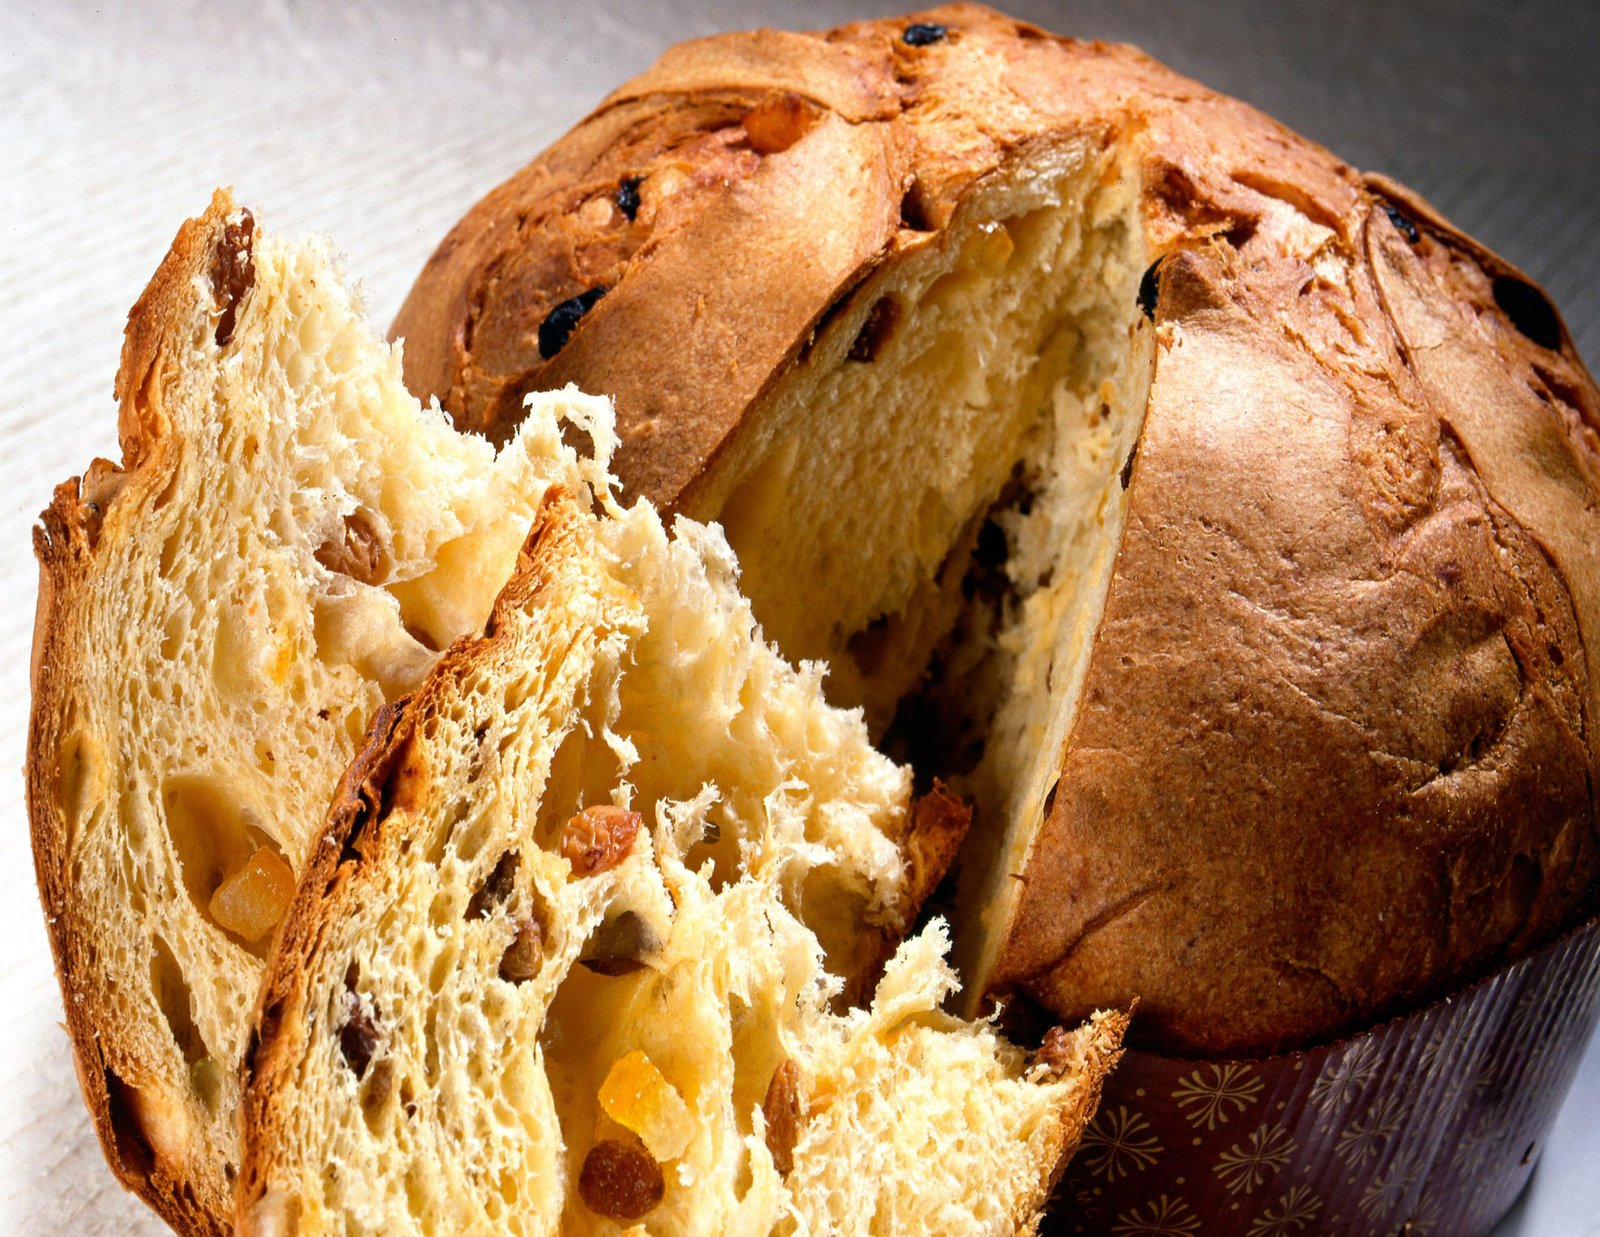 sliced-traditional-panettone-with-fruit-5Q47YHE-min